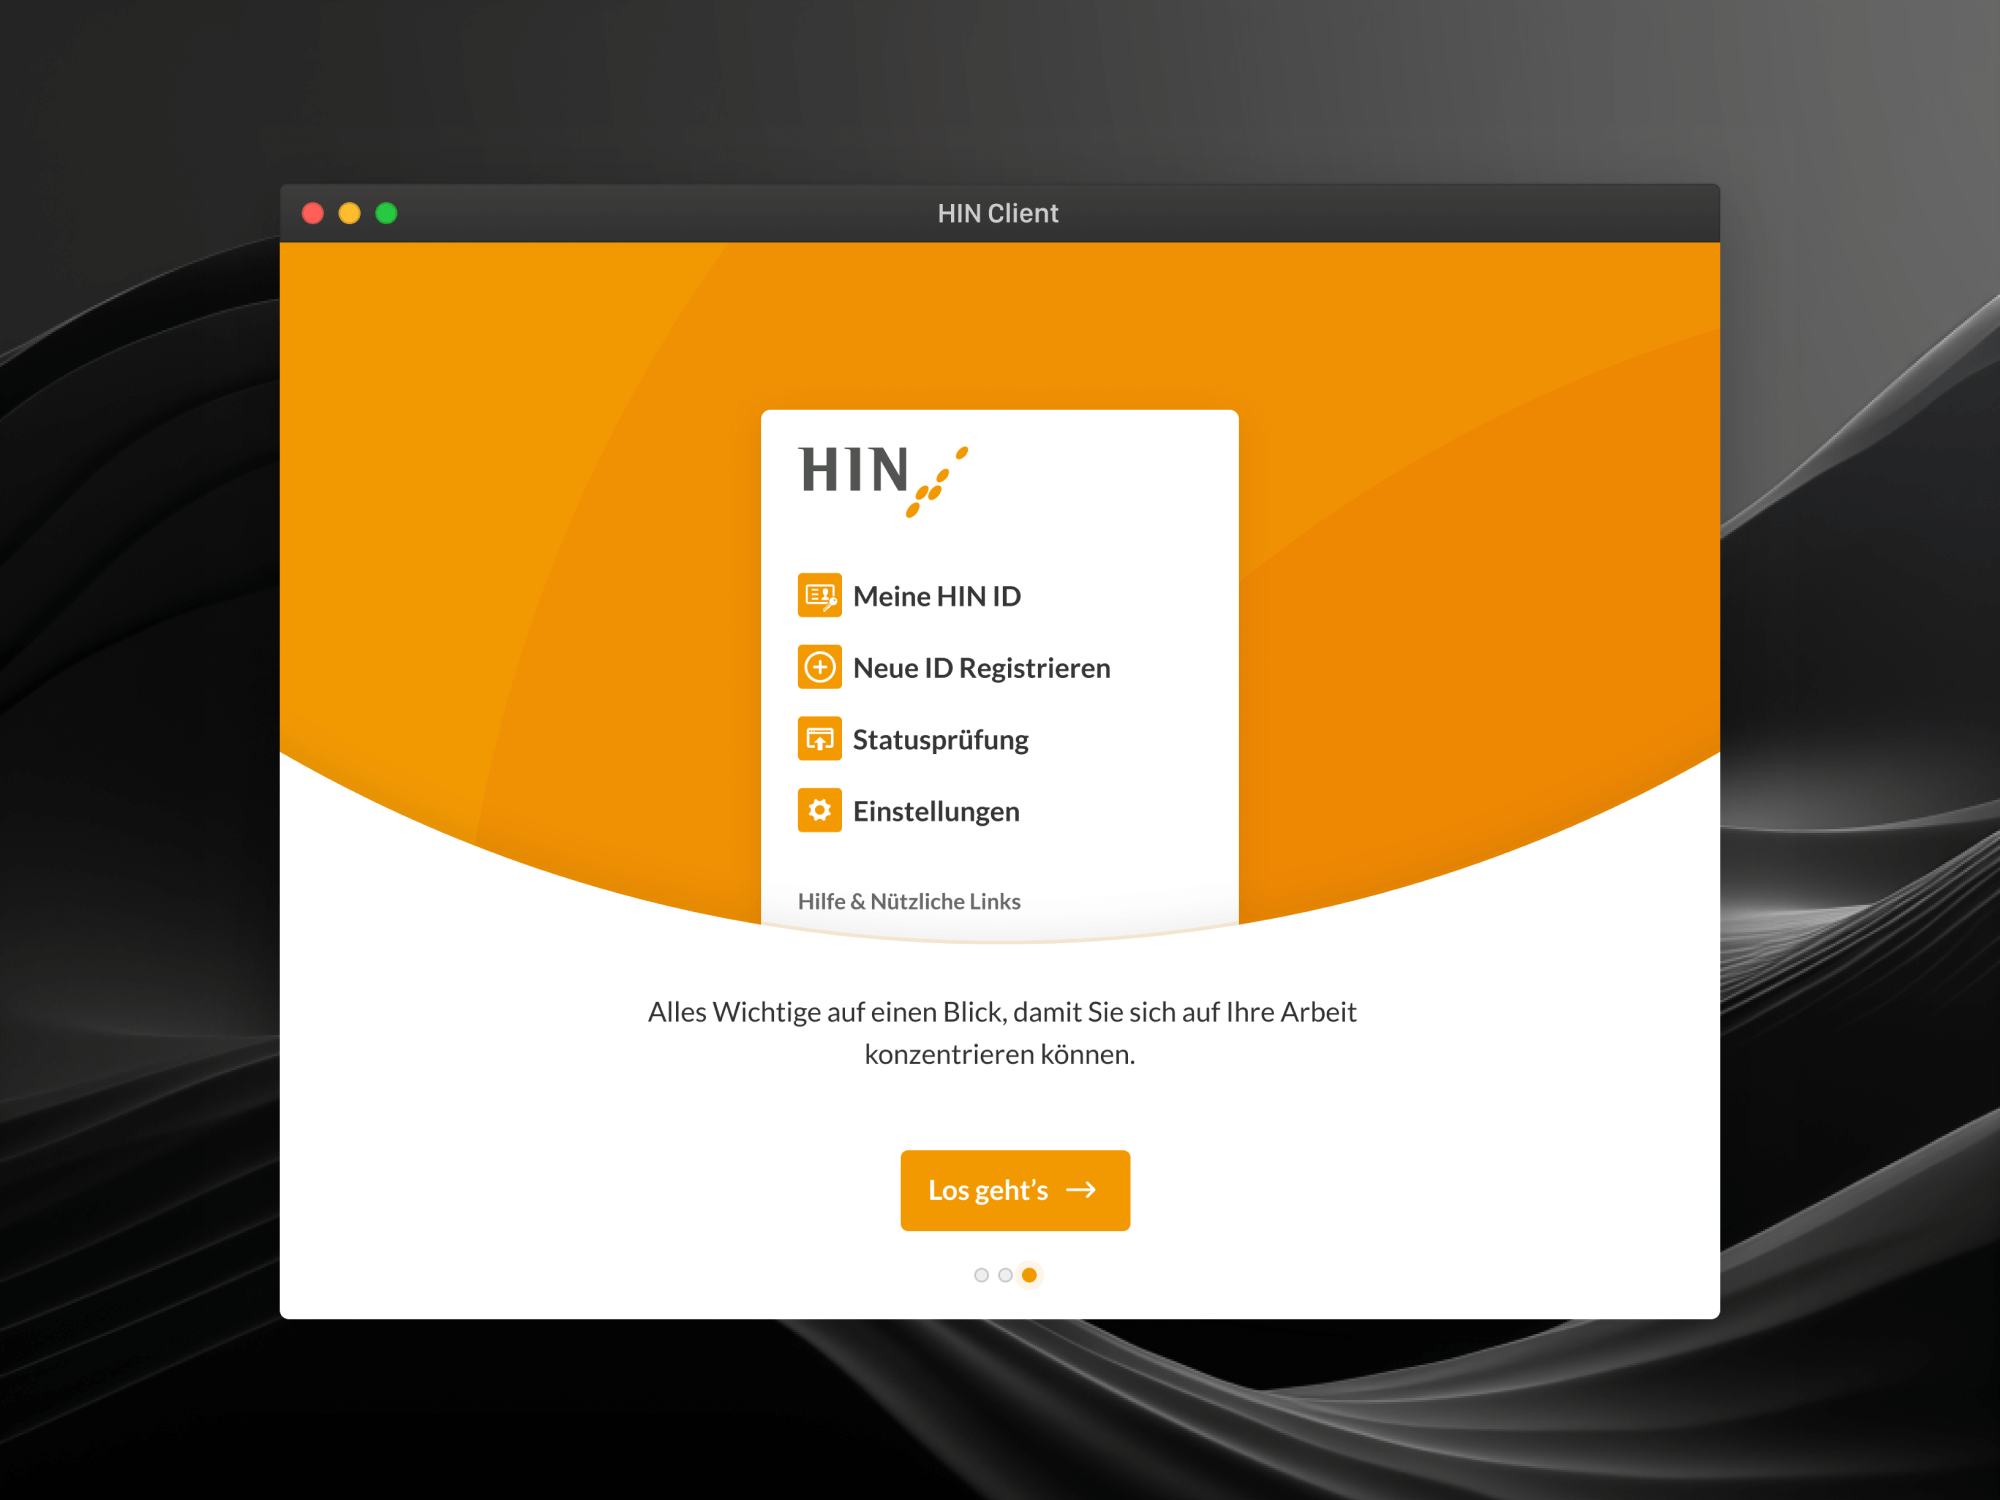 Onboarding and support website for HIN